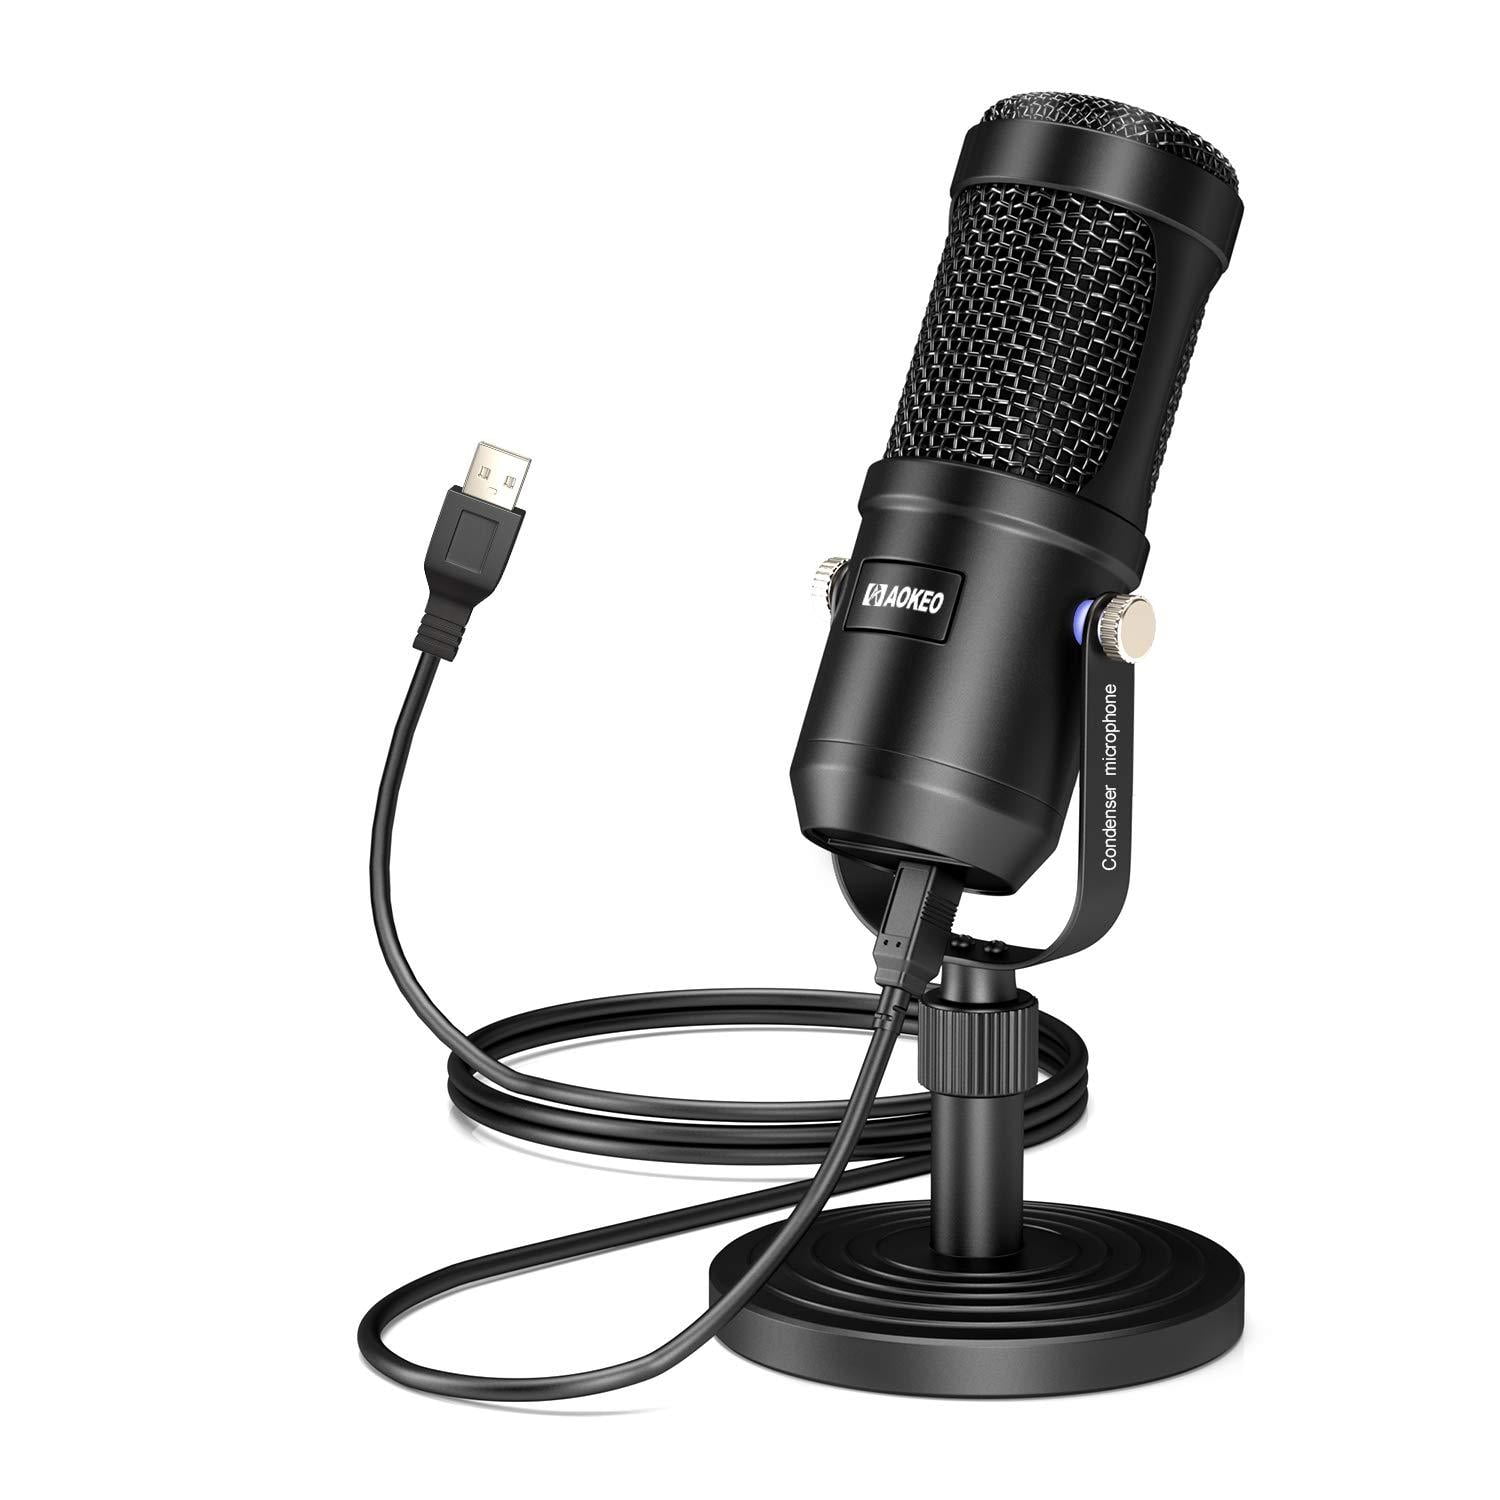 Podcast Microphone for Phone, MTPHOEY Professional USB Microphone  forTikTok/PC/Pad/PS4/i*O*S/Android,Computer Mic with Noise Cancelling,Asmr